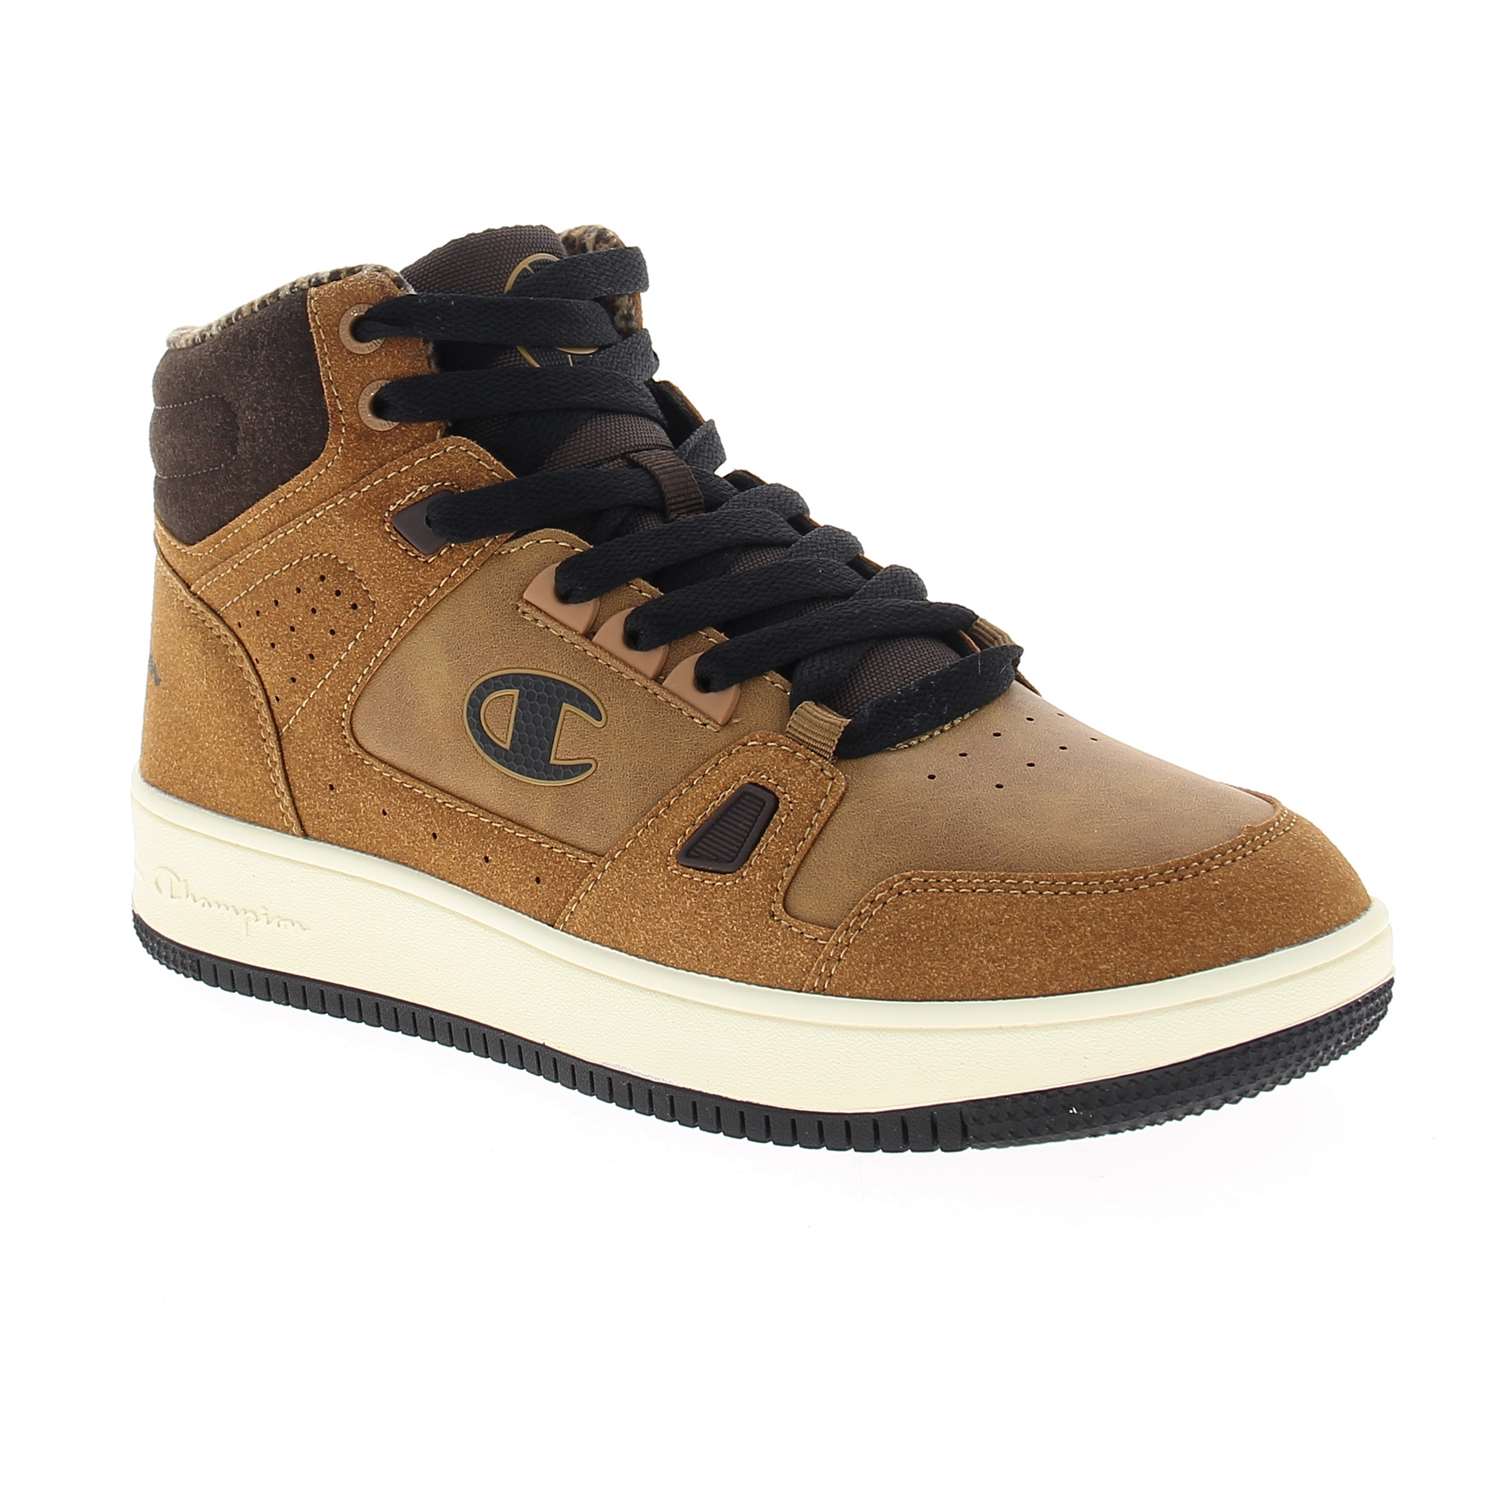 01 - REBOUND WINTERIZED - CHAMPION - Baskets - Synthétique